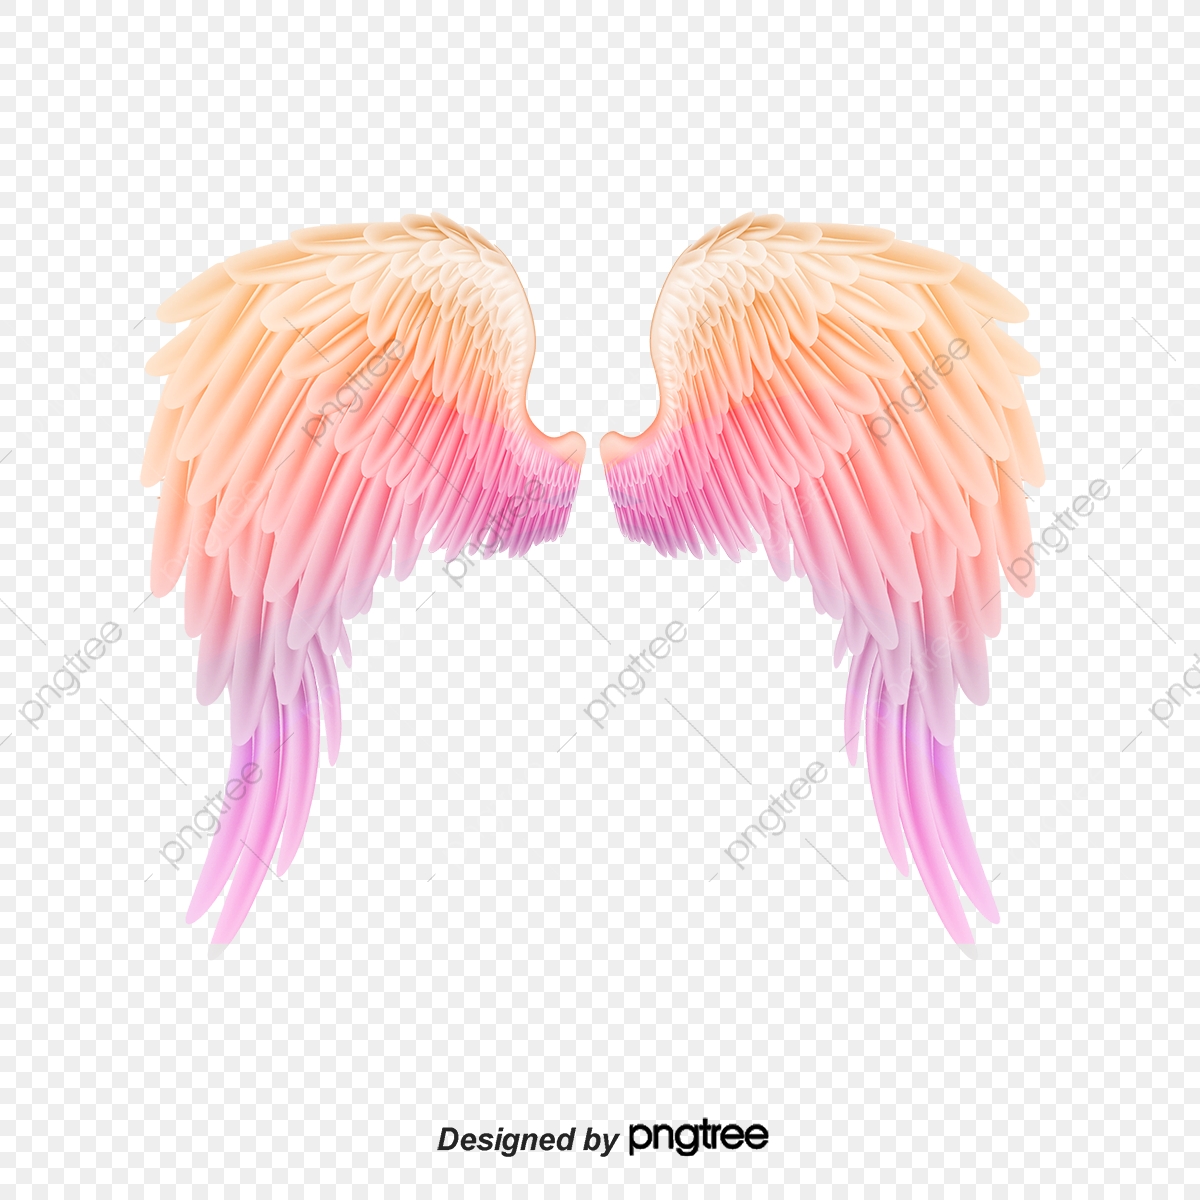 clipart angel colorful